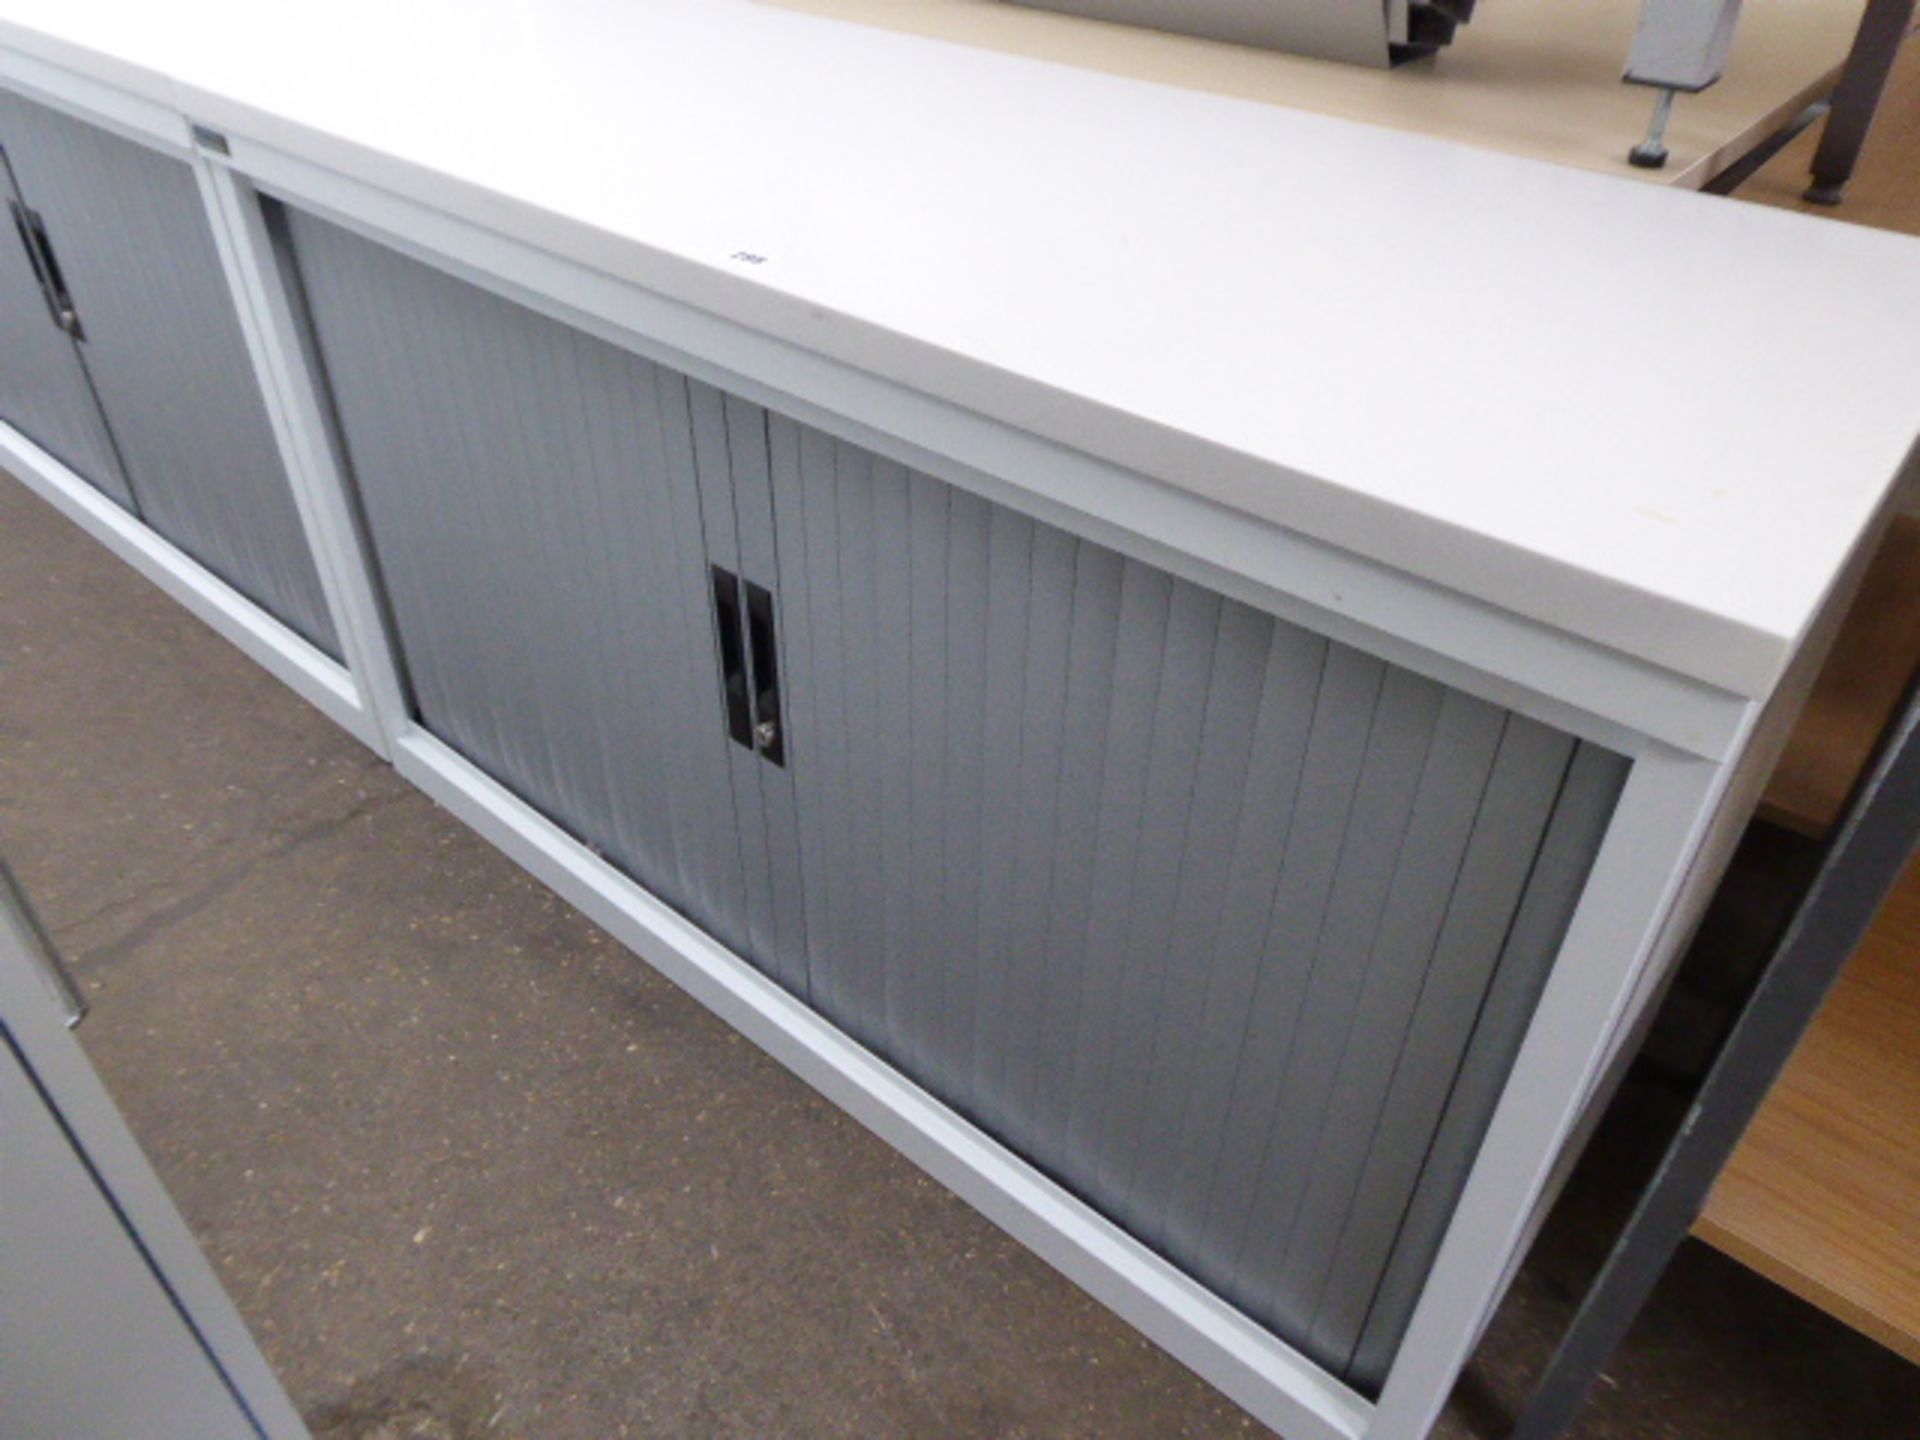 Silverline white double tambour cabinet with a stone composite top 120cm